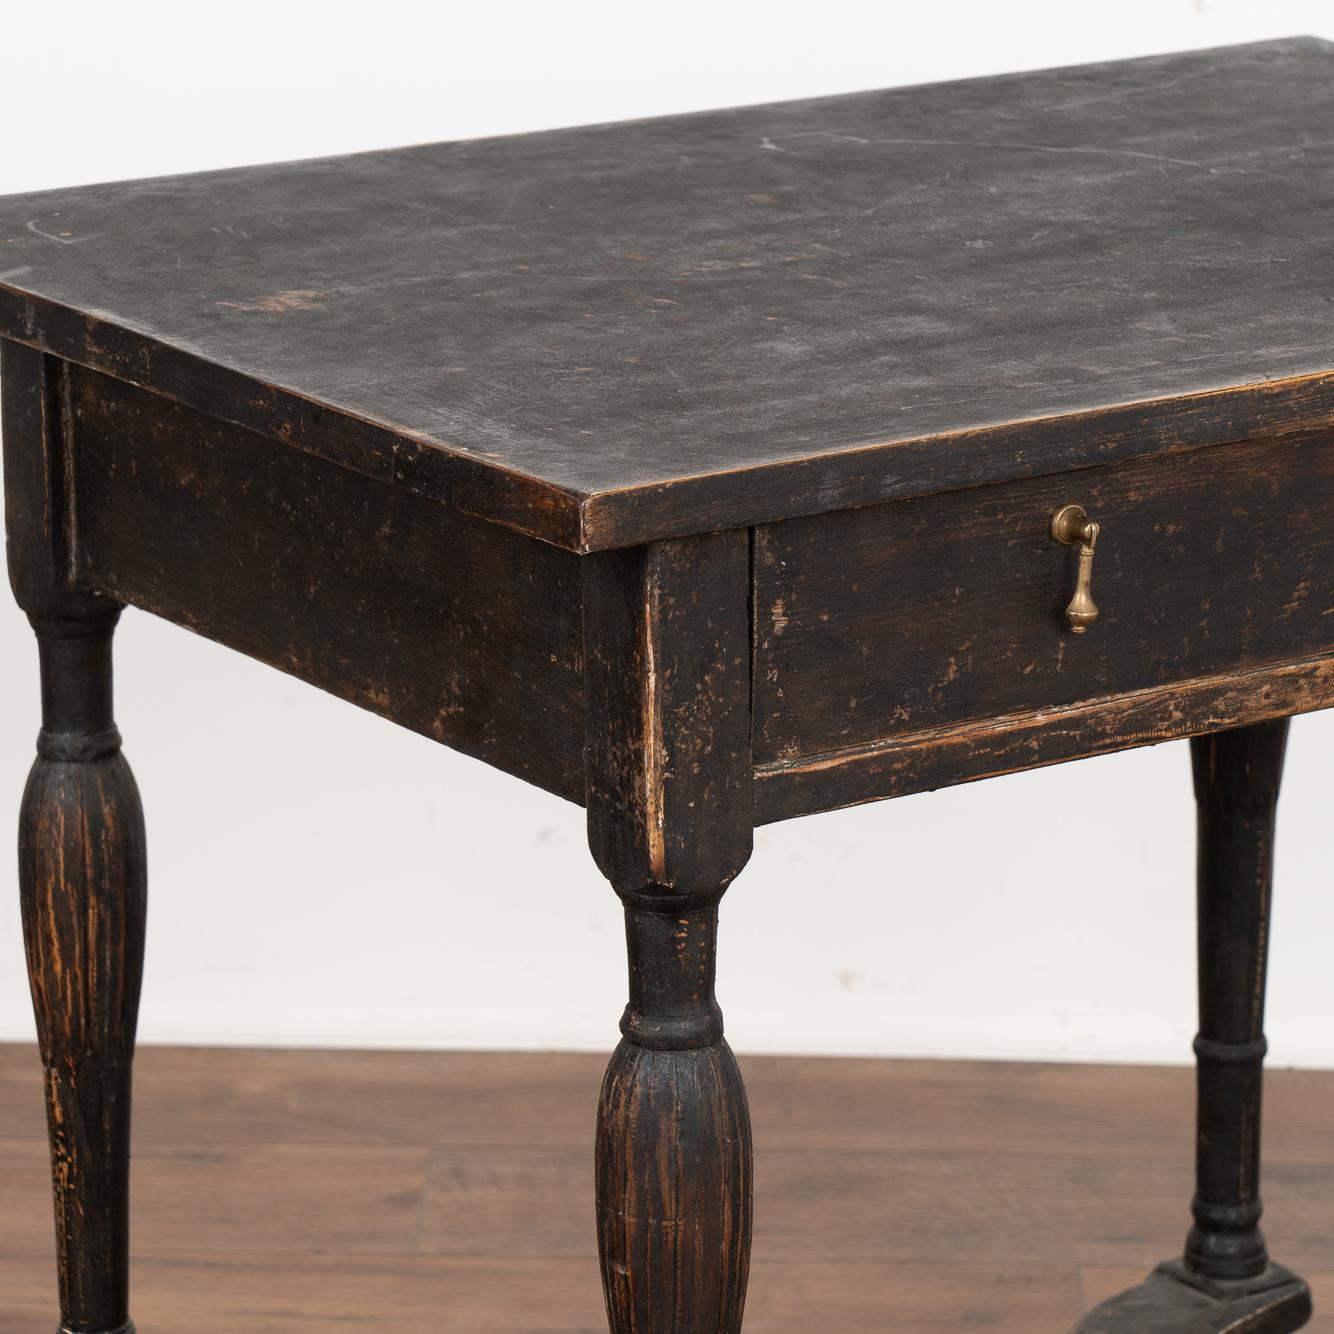 19th Century Black Side Table With Single Drawer, Sweden circa 1820